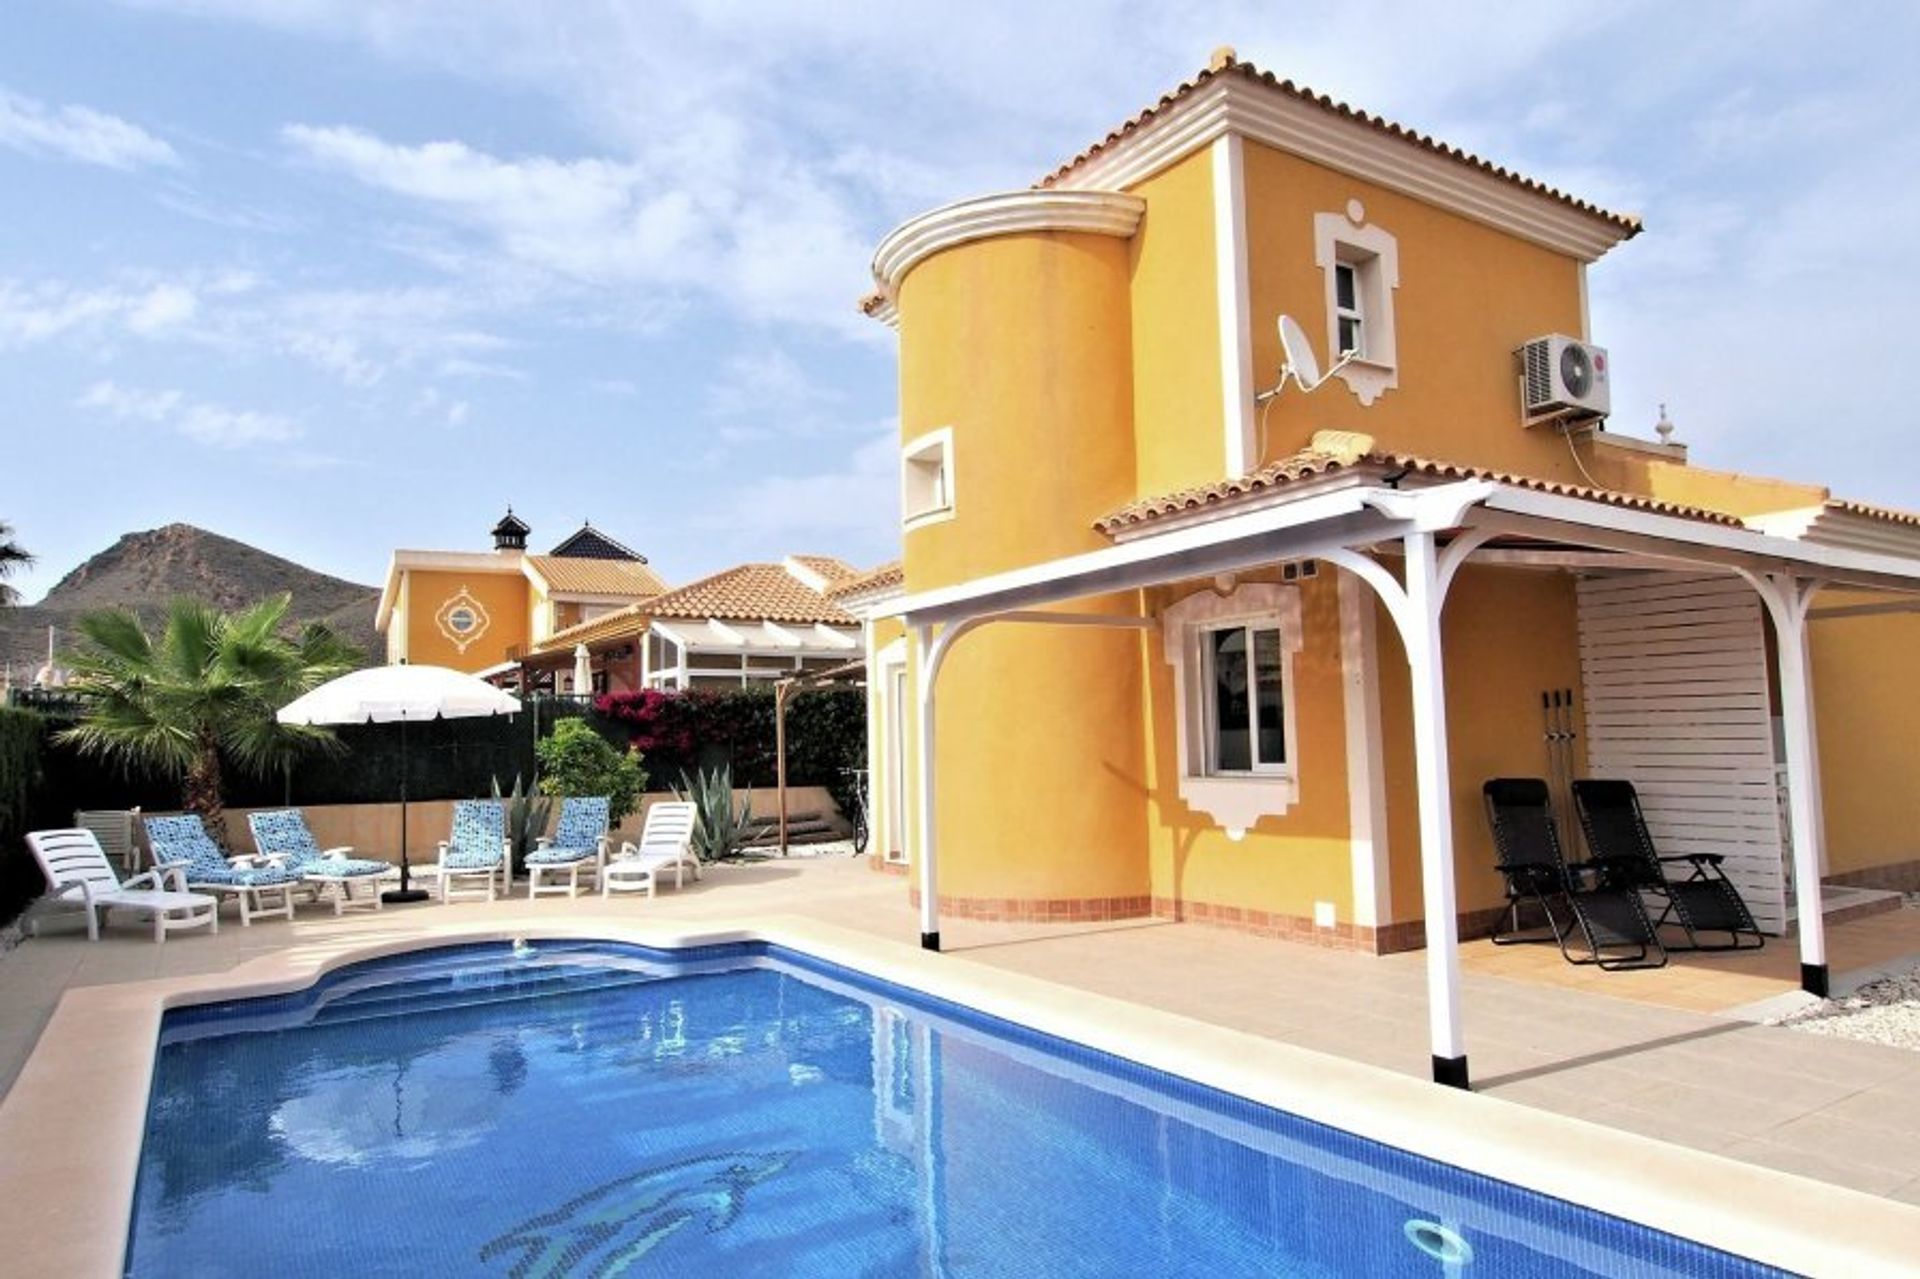 Discover our holiday rentals with private pools